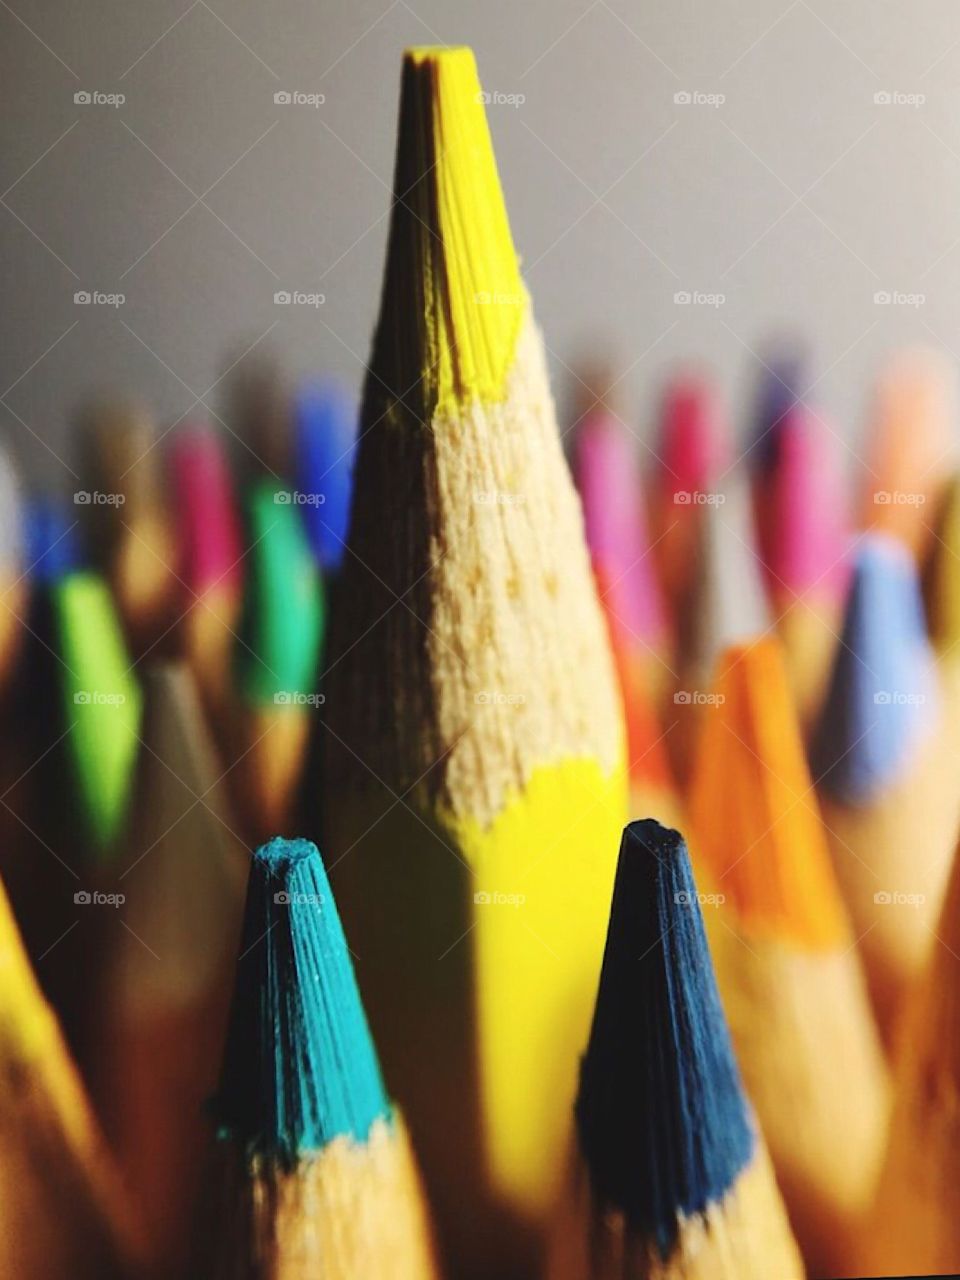 Close-up of a colored pencils